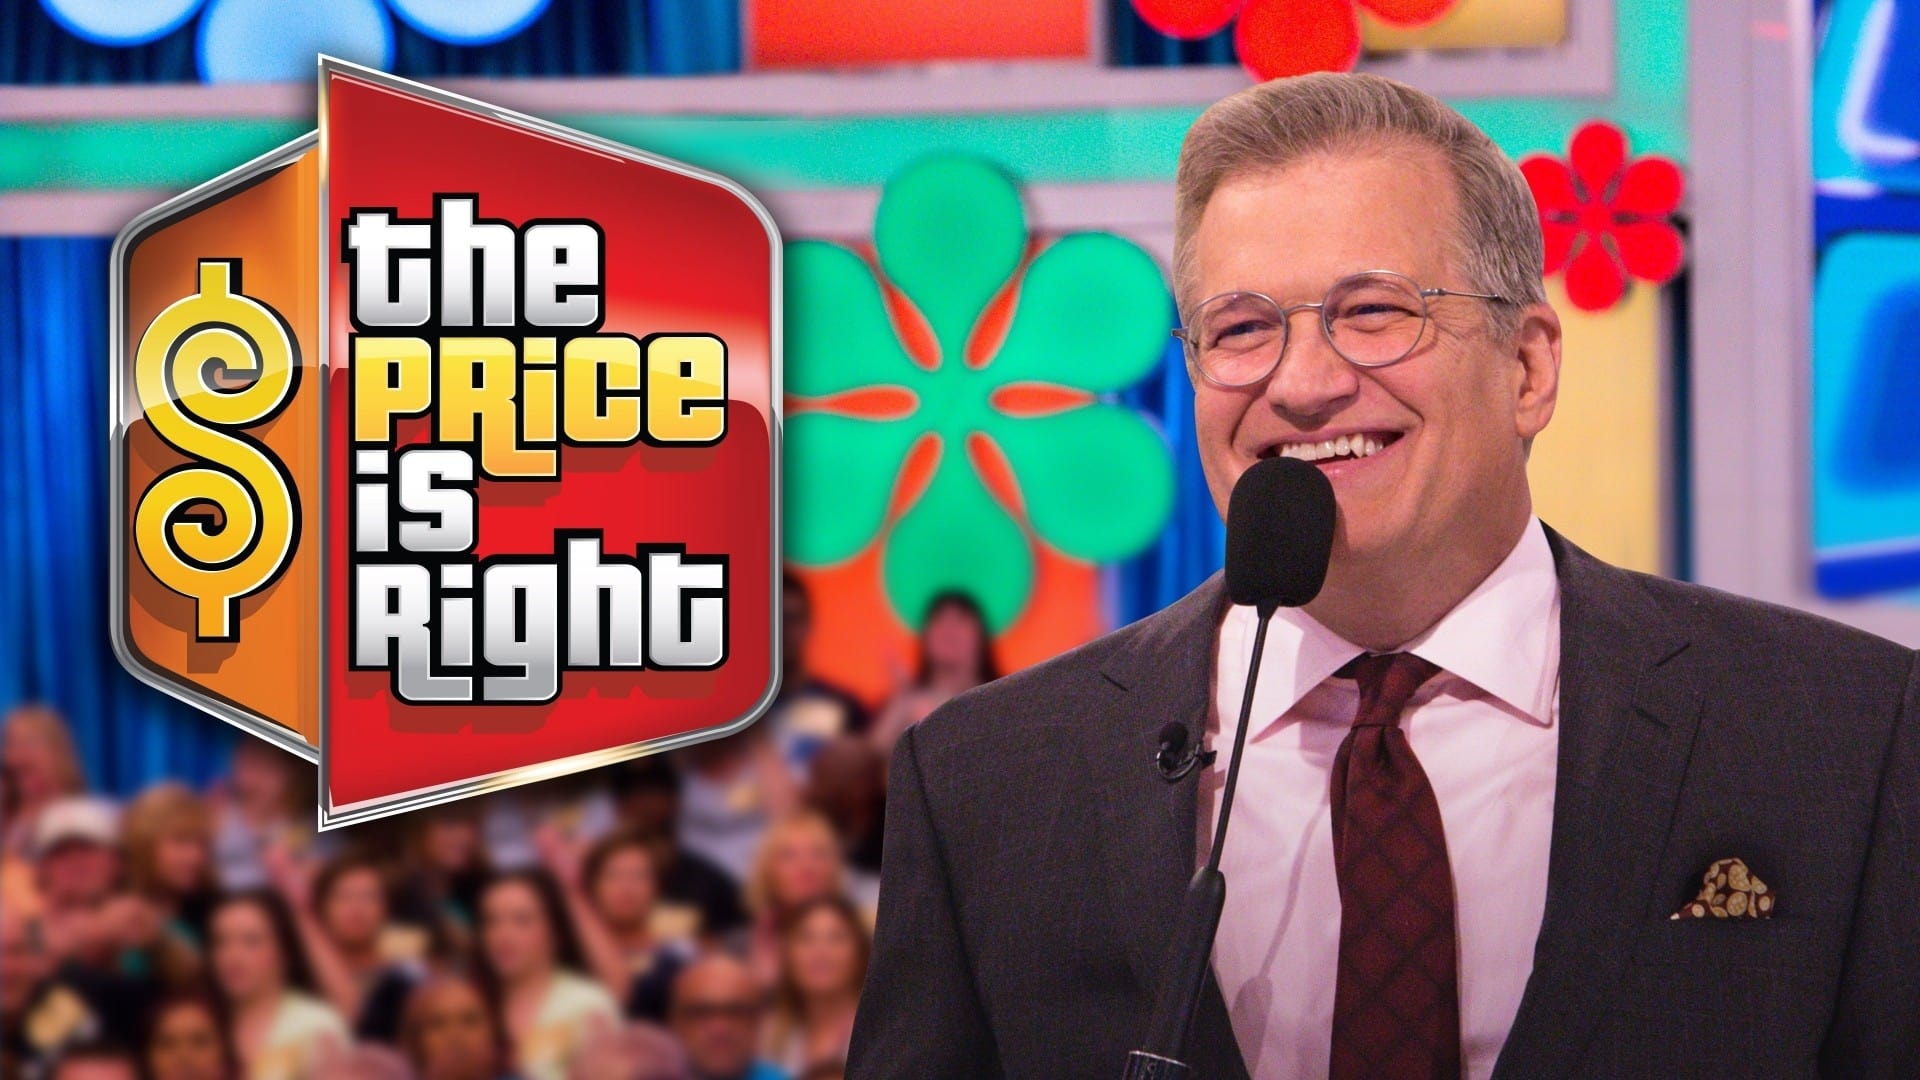 The Price Is Right - Season 6 Episode 138 : The Price Is Right Season 6 Episode 138